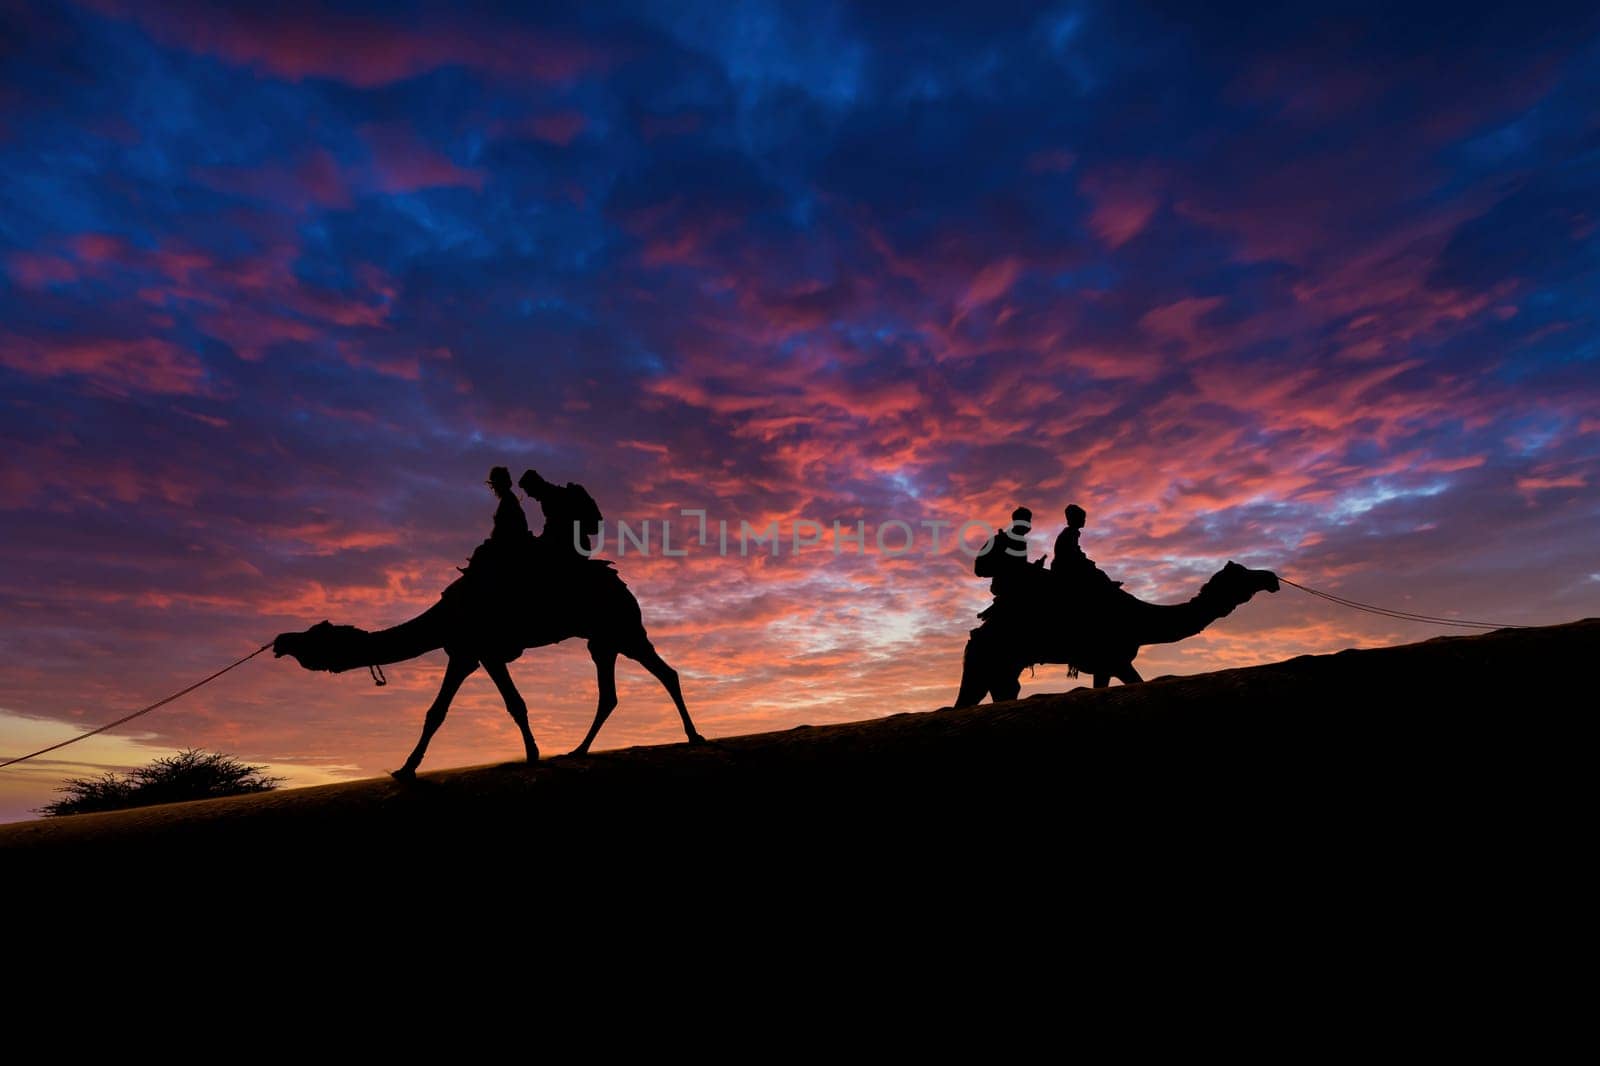 Silhouette of camel with two people sitting on it crossing over sand dunes in Sam Jaisalmer Rajasthan India by Shalinimathur